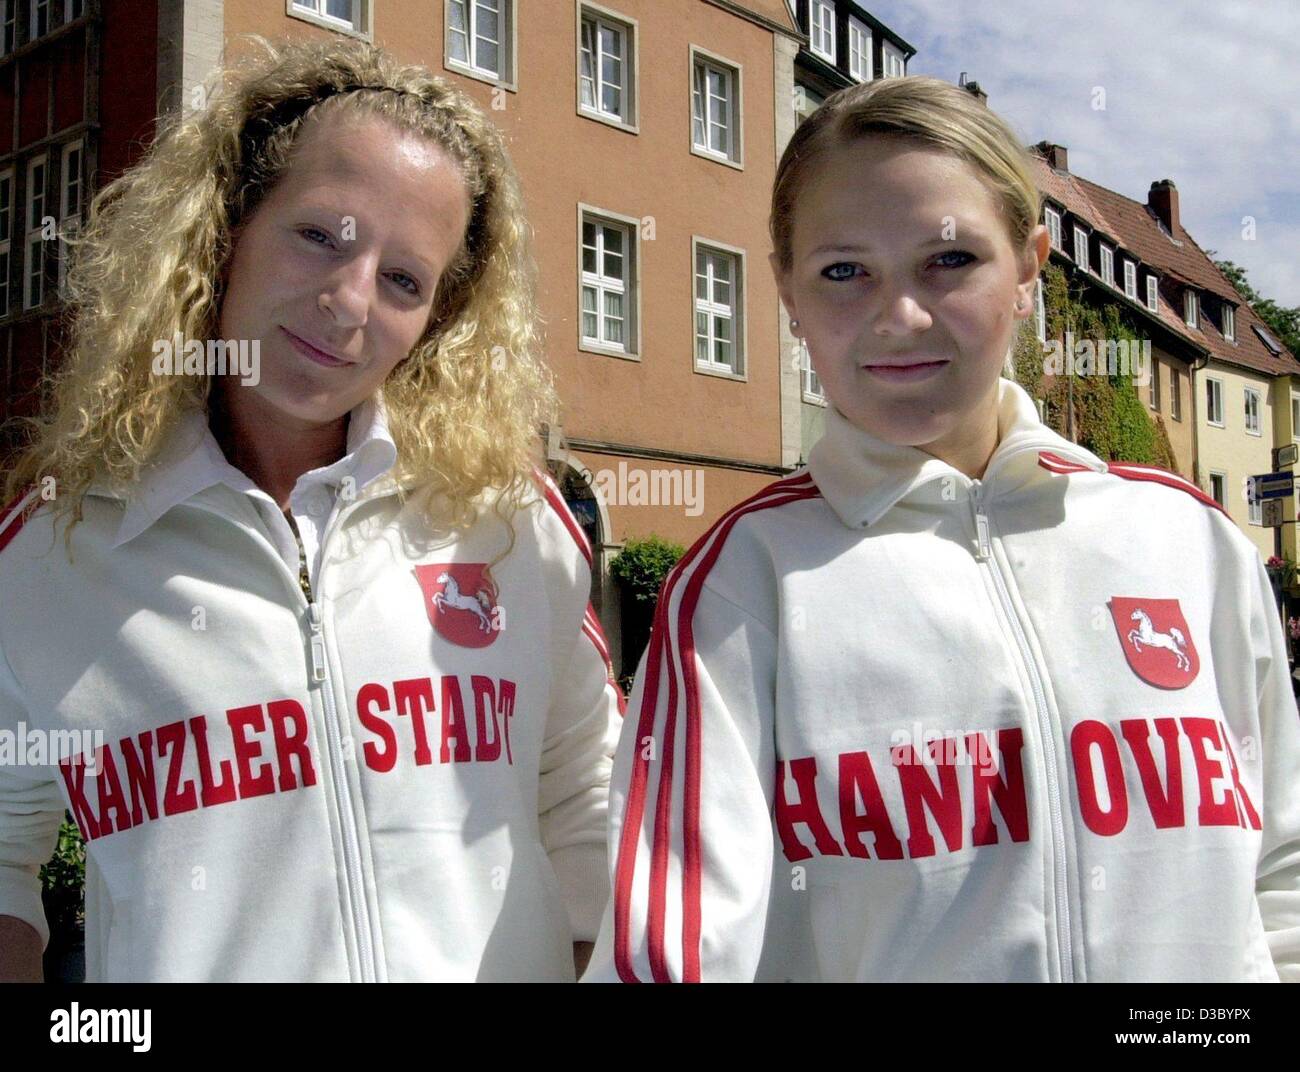 (dpa) - Helle Poltermann (L) and Tatjana Lapatin wear the new track suits featuring the emblem of the state of Lower Saxony and in big letters 'Kanzler-Stadt' (chancellor city) and 'Hannover' respectively, in Hanover, Germany, 18 July 2003. The new fashion is available in a boutique and costs 59 eur Stock Photo